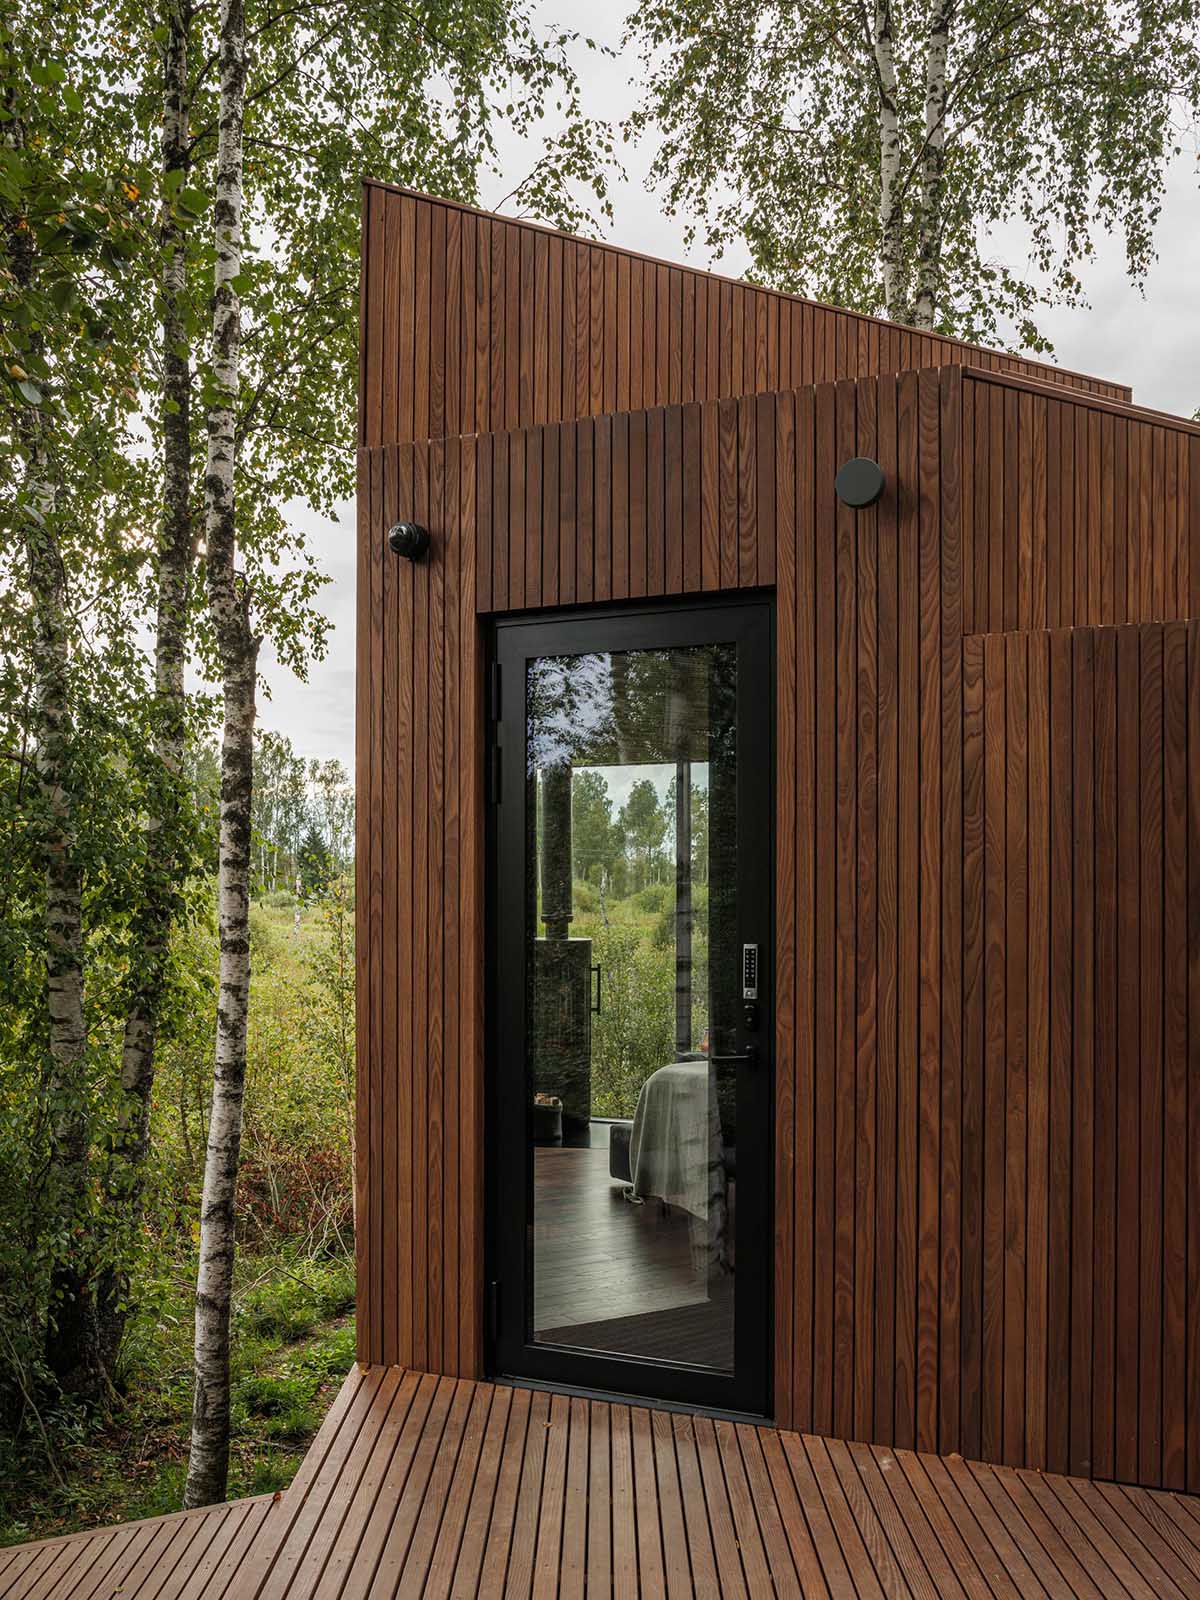 A black-framed glass door provides a glimpse of the interior and views beyond.